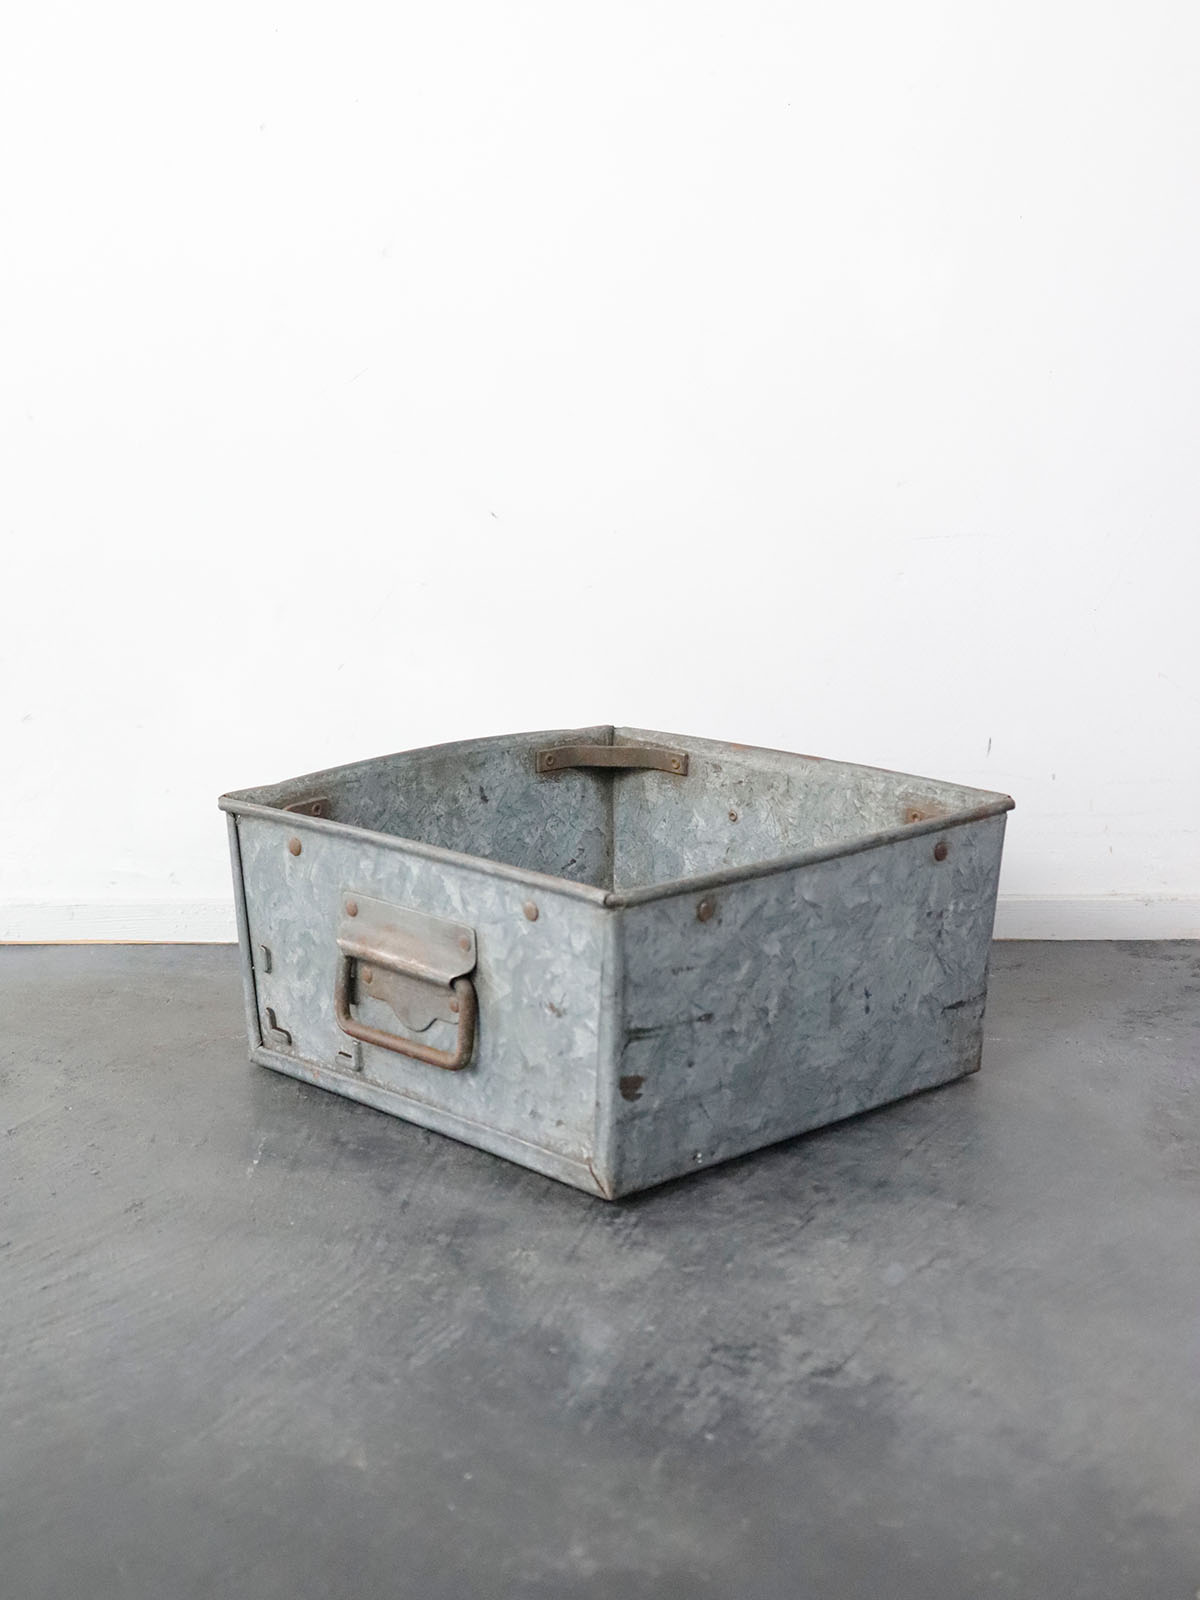 aluminum crate,stacking,England,vintage,factory,industrial